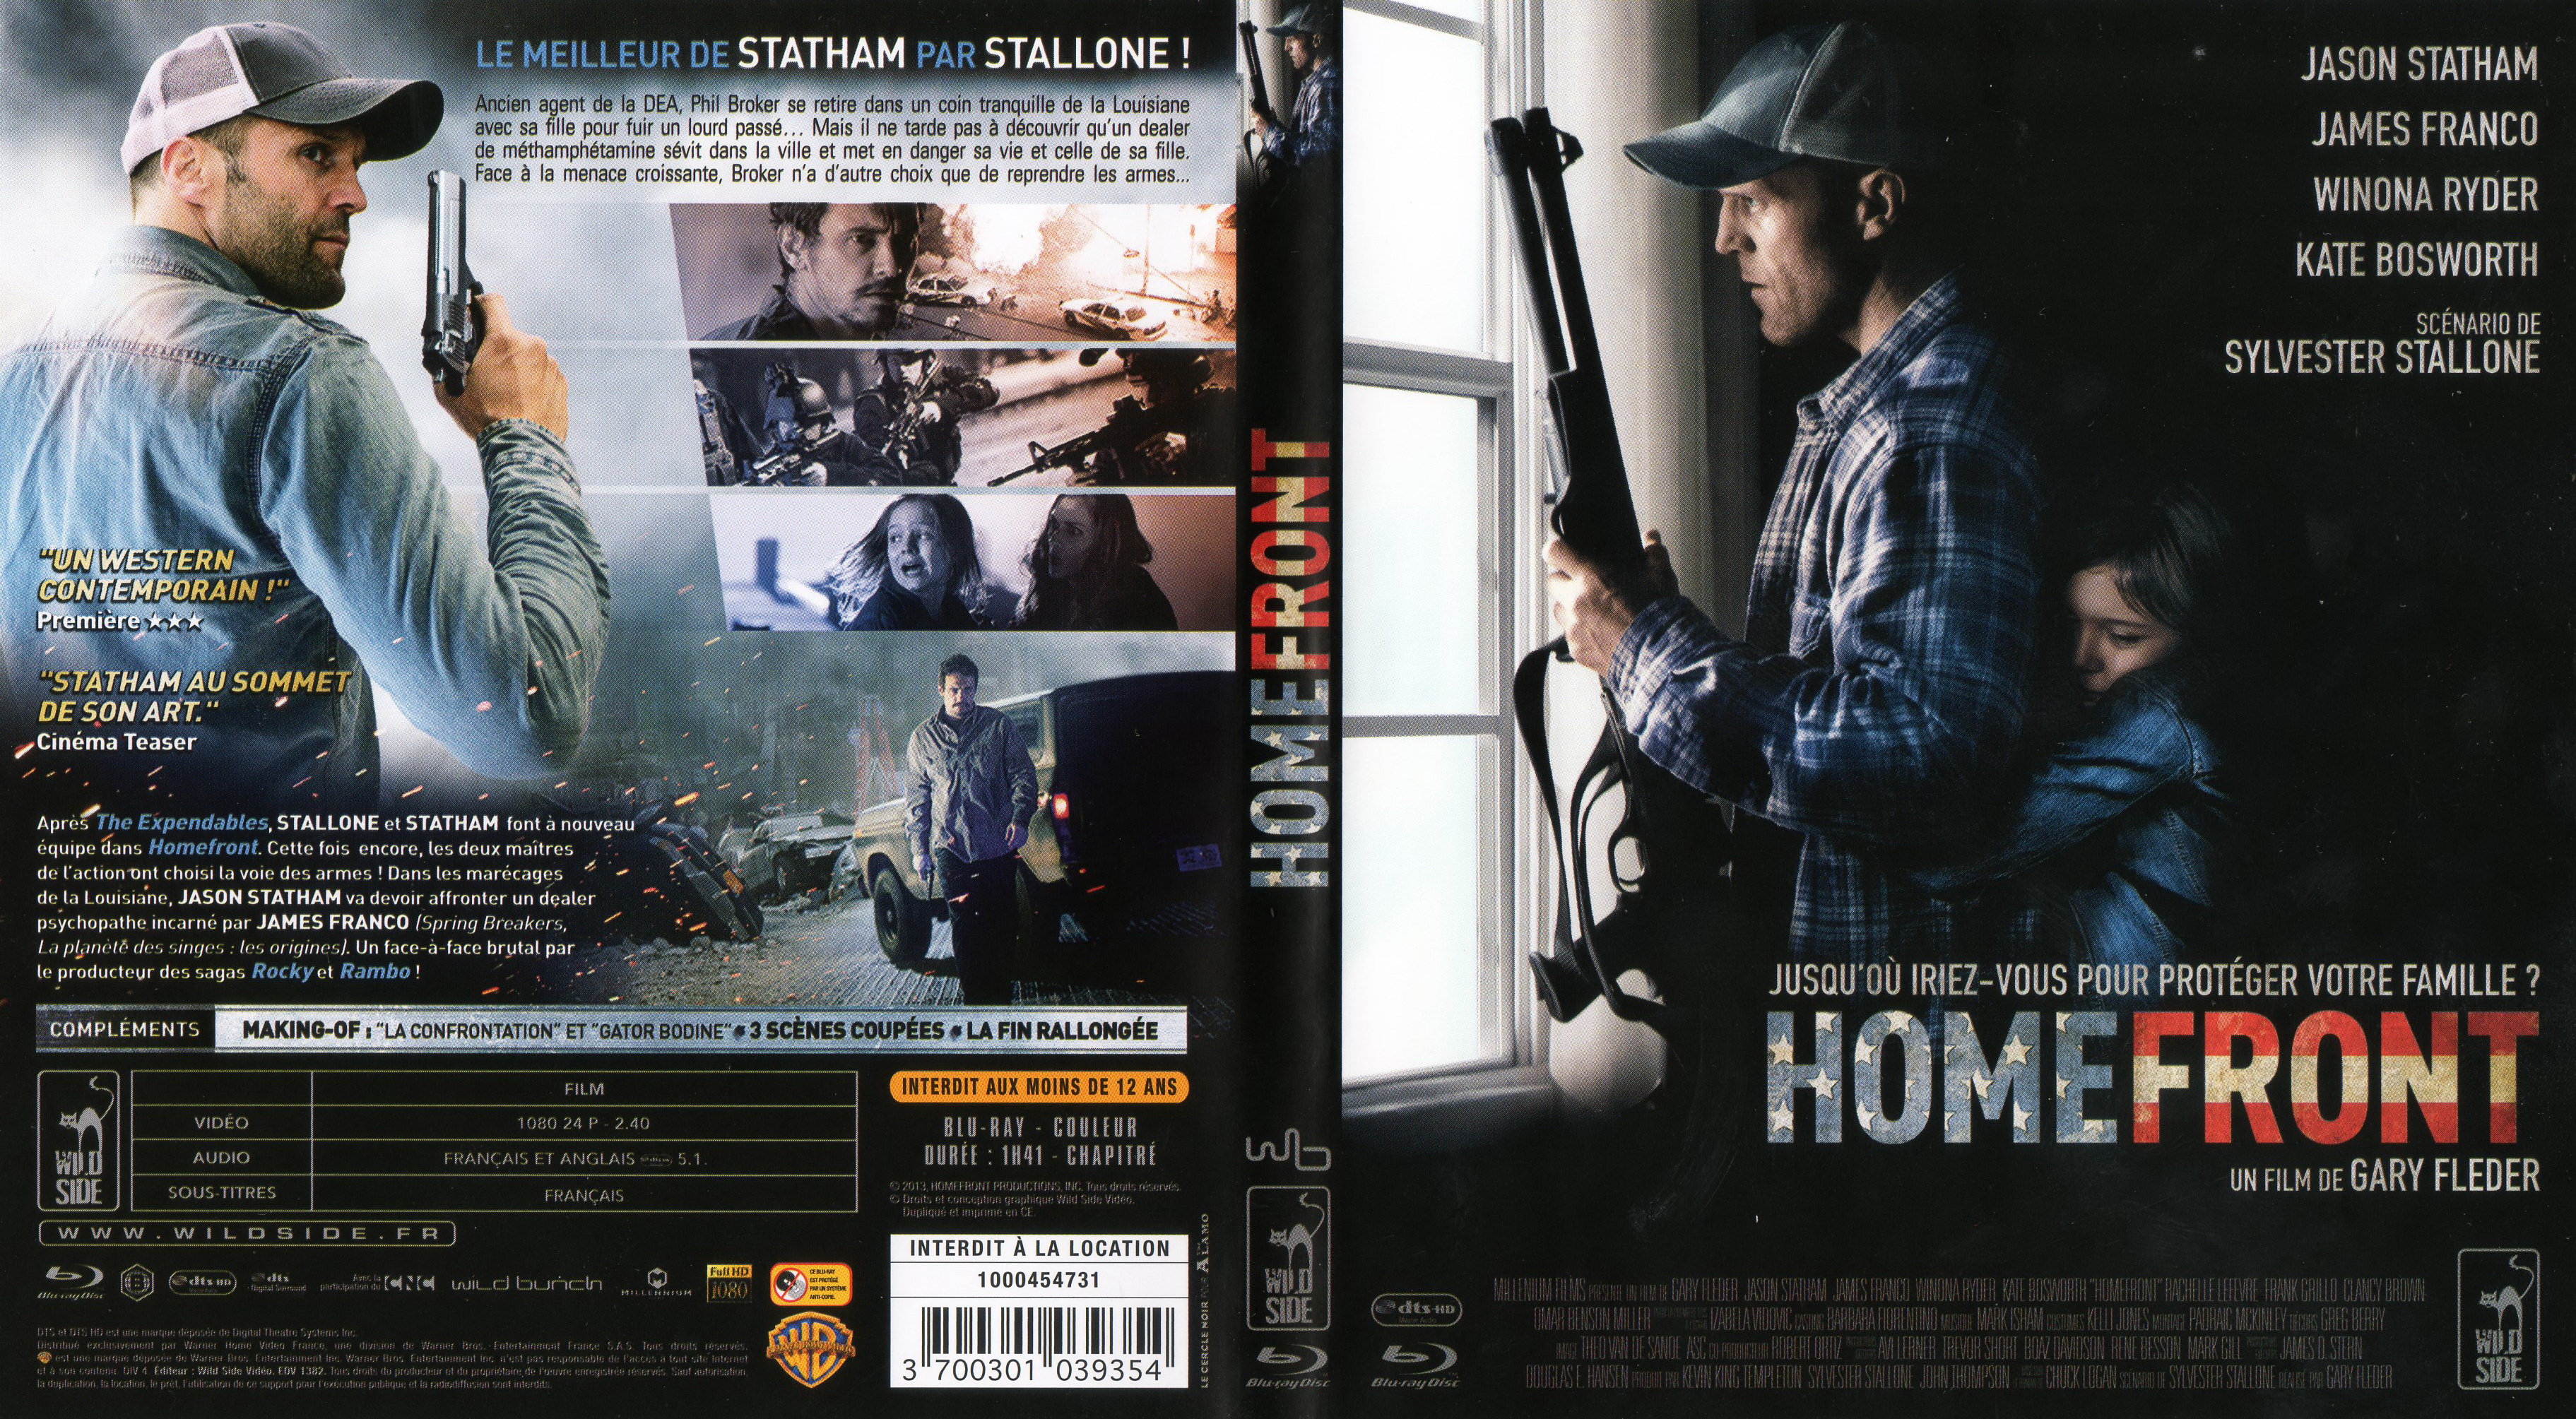 Jaquette DVD Homefront (BLU-RAY)